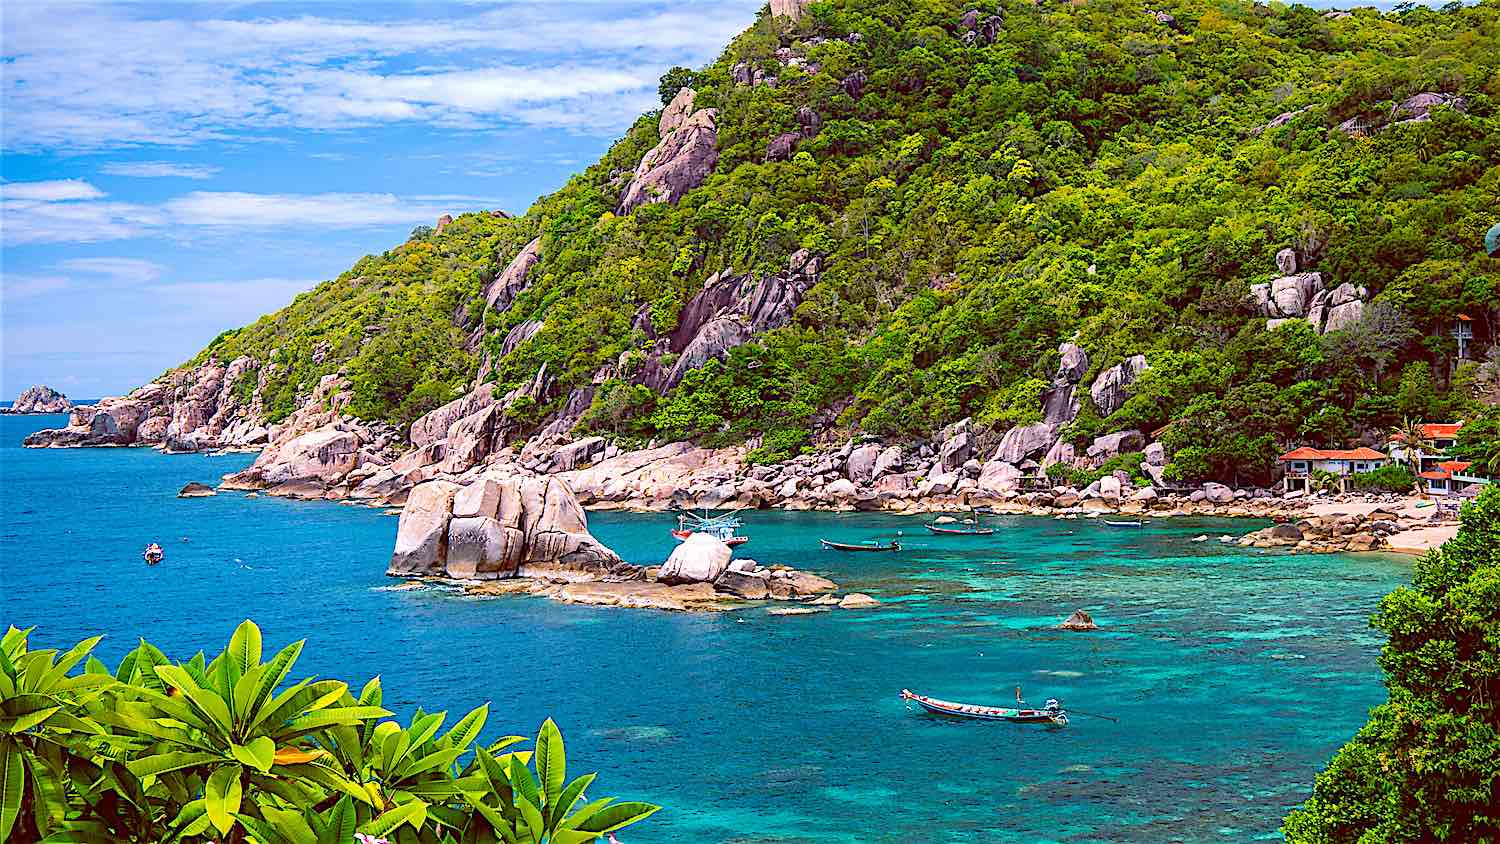 The best sites for Snorkeling in Koh Tao Thailand